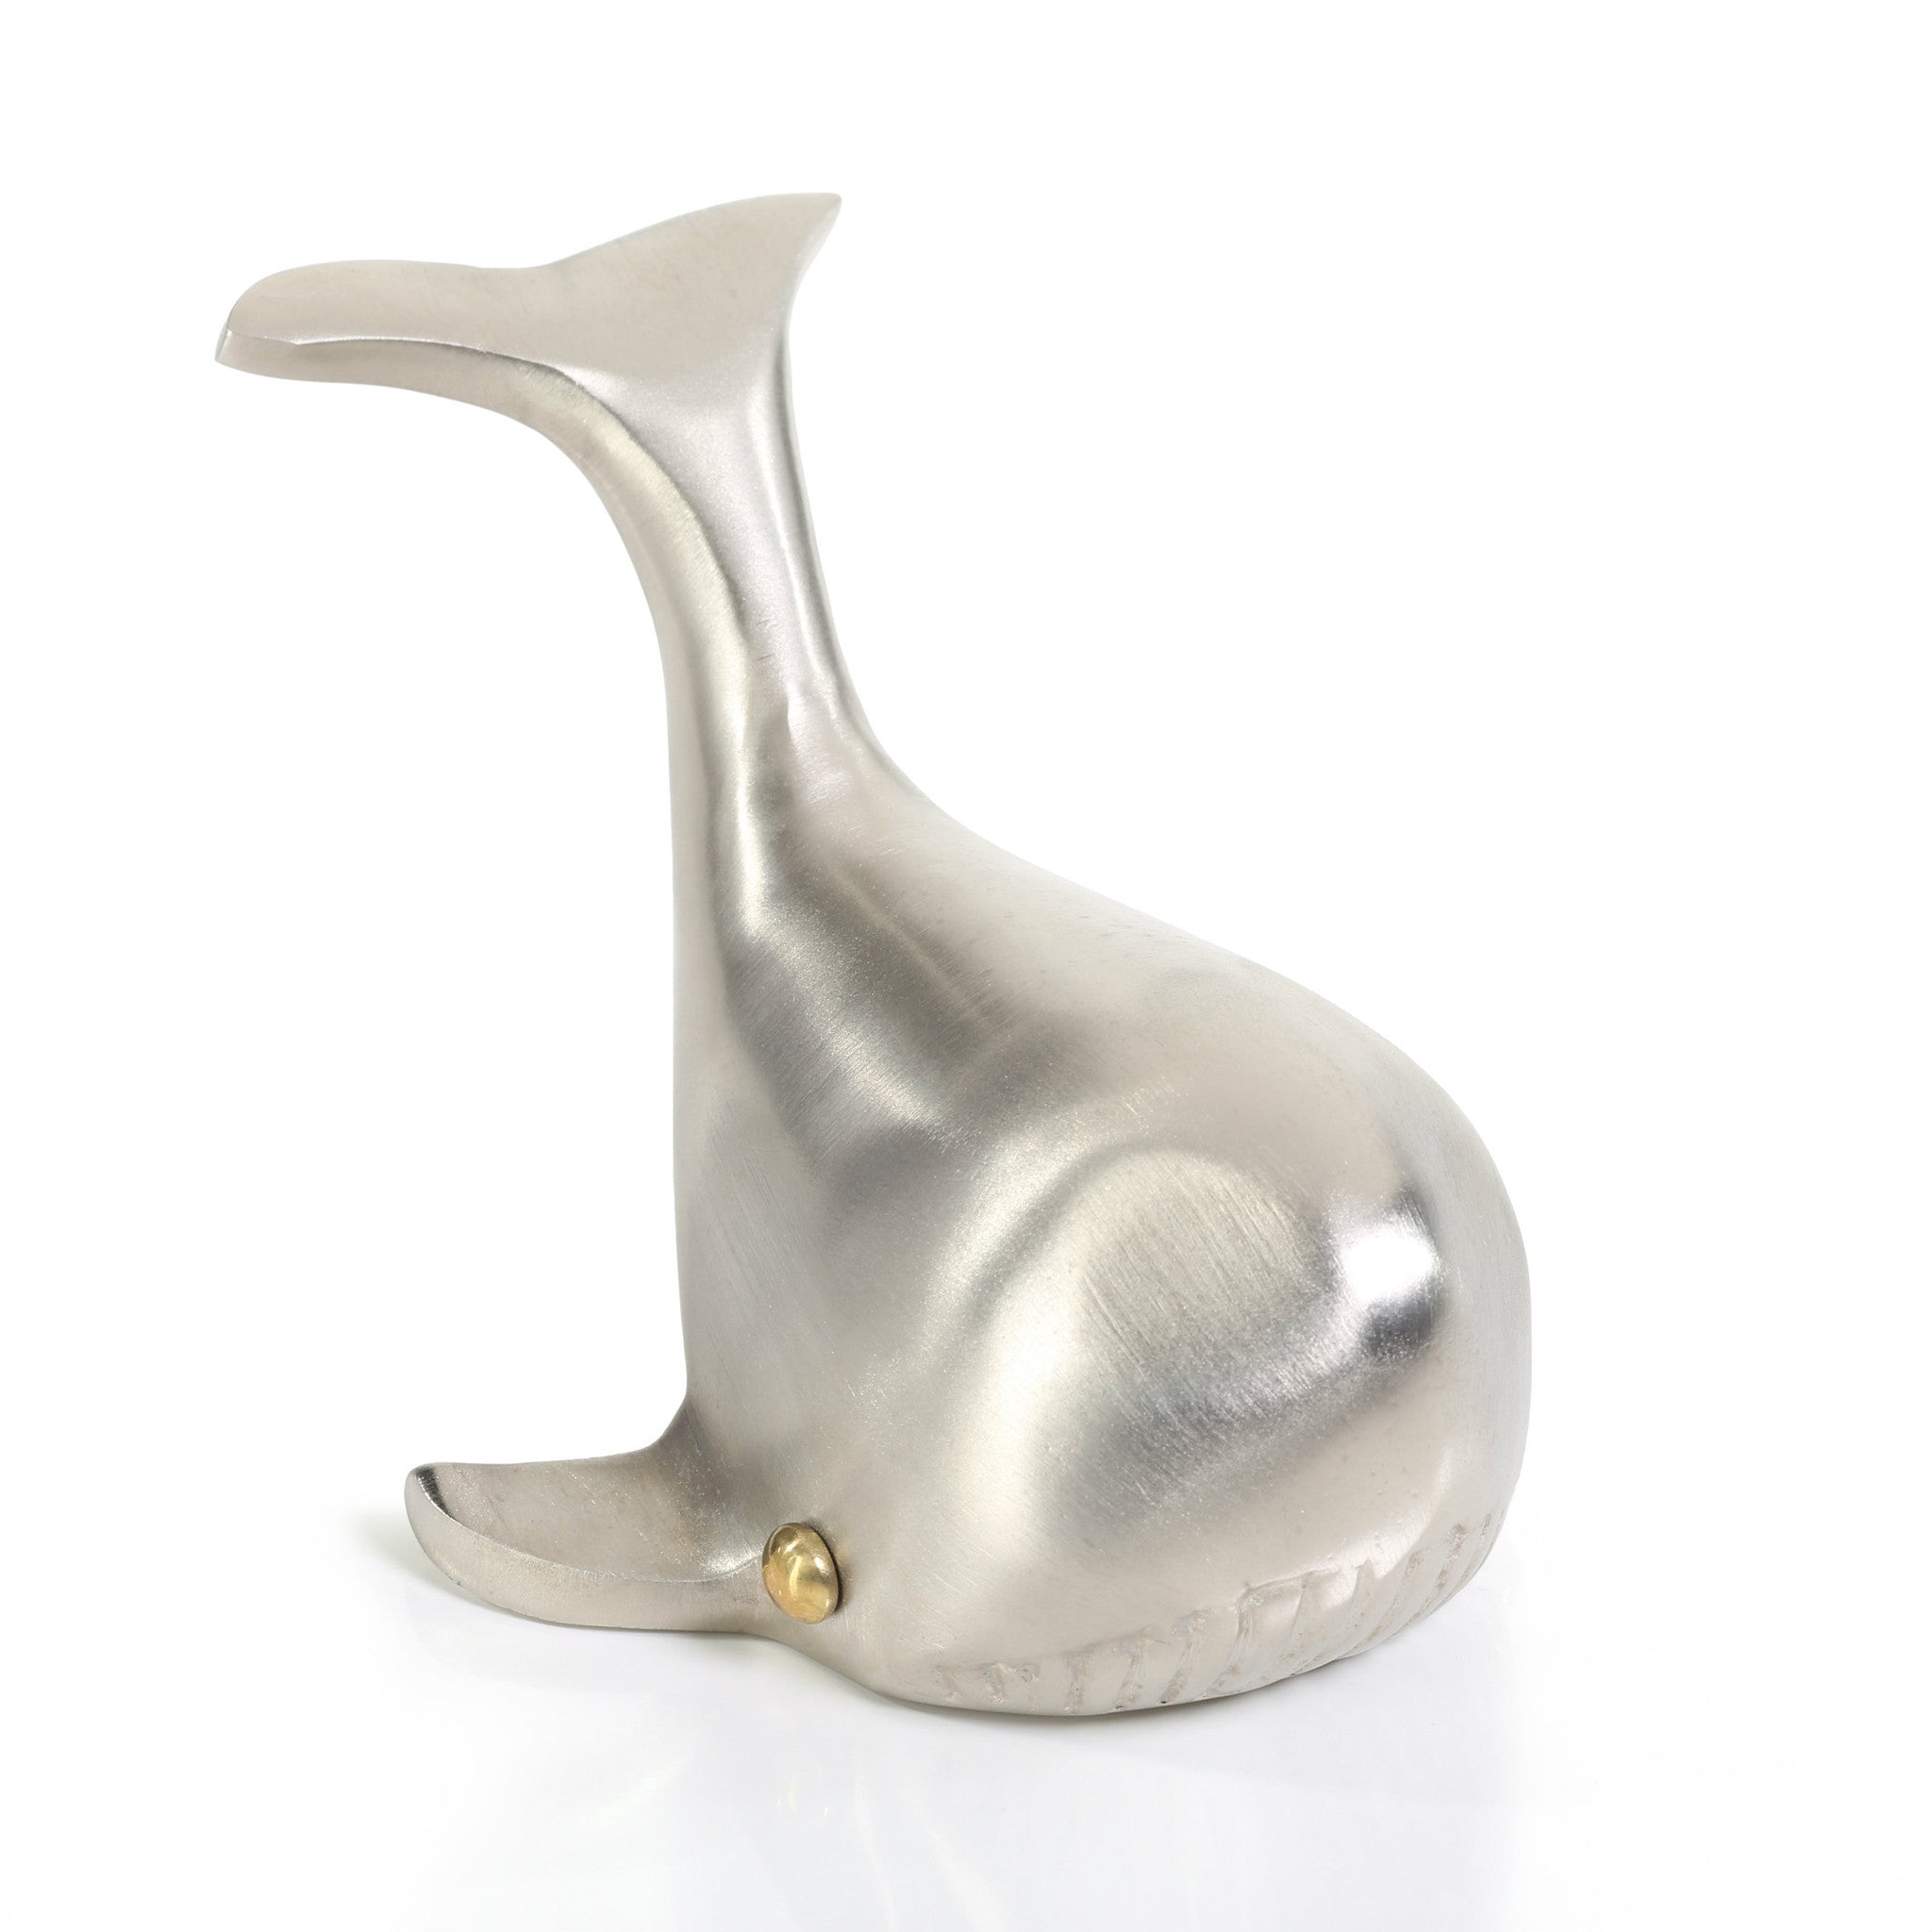 Orca Whale Bottle Opener - CARLYLE AVENUE